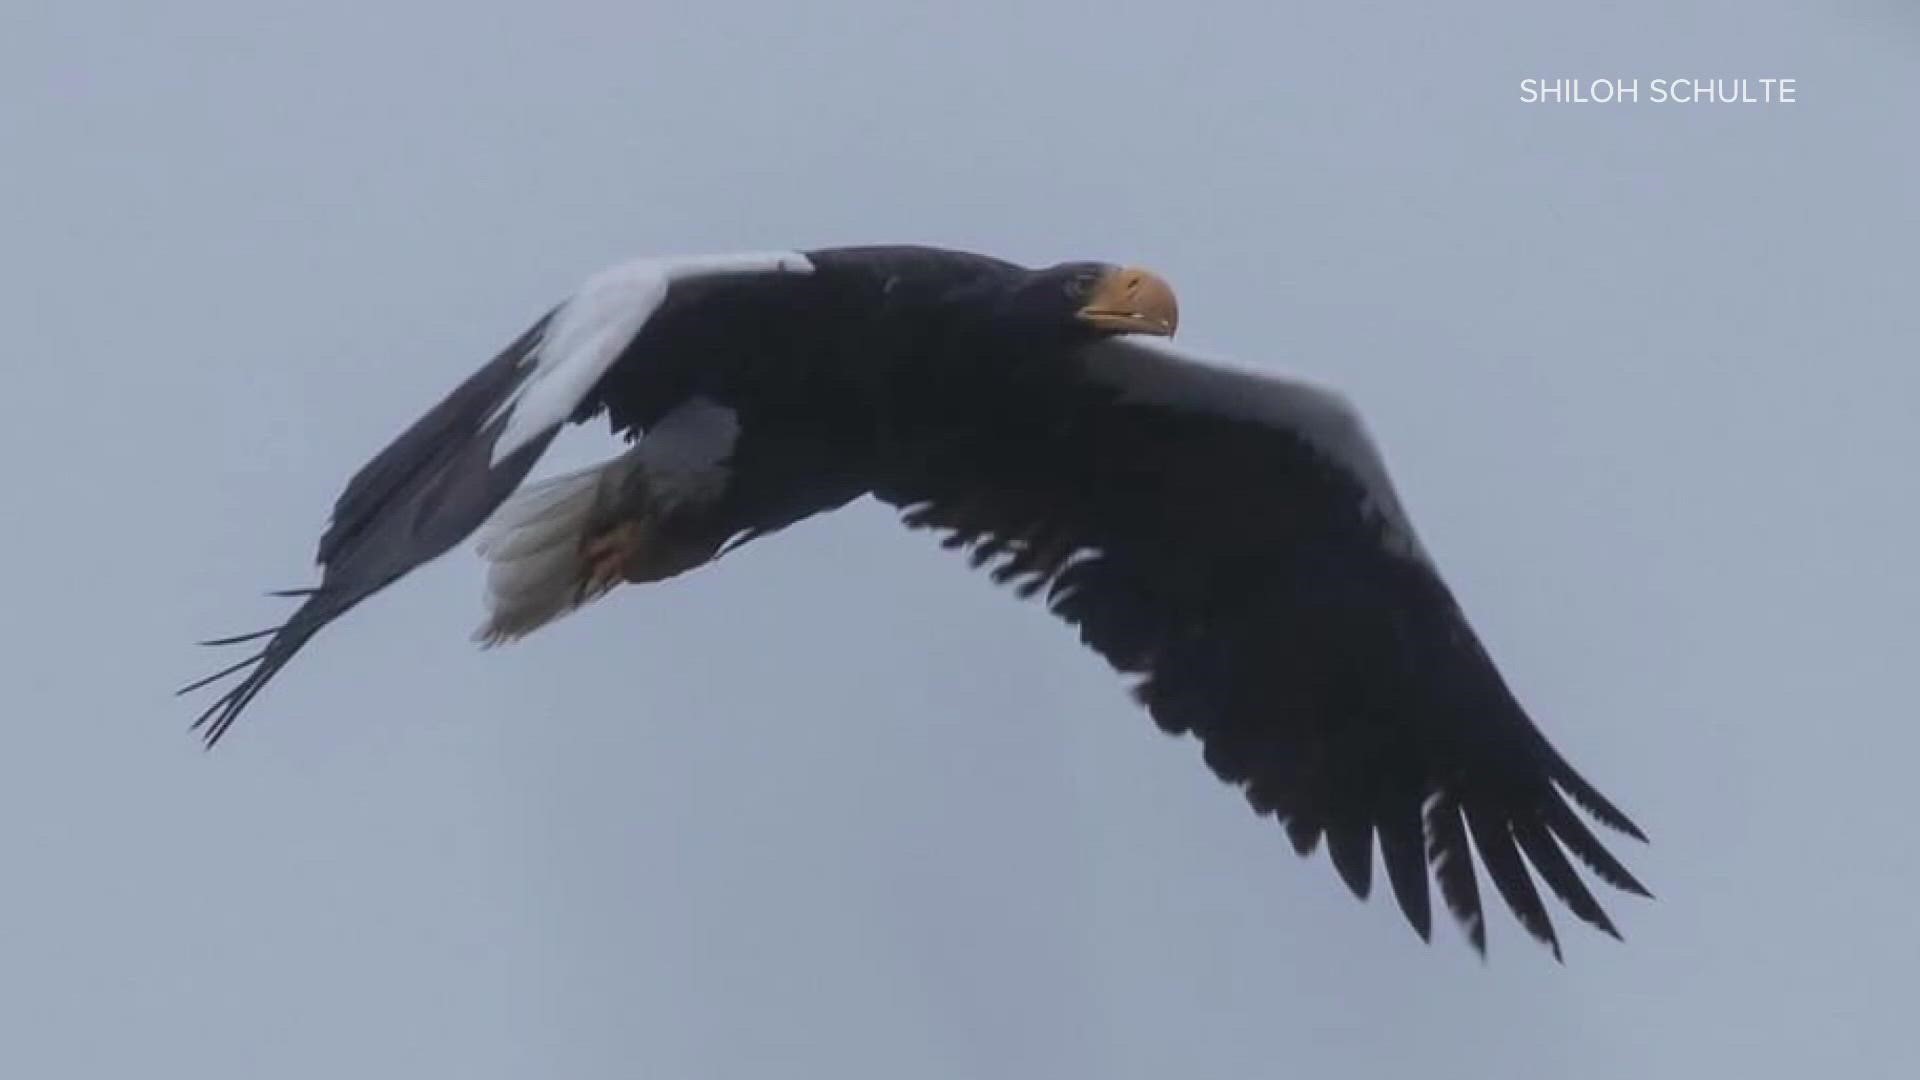 The Steller's sea eagle is native to Asia. It made Maine its home from December of 2021 to March of 2022.